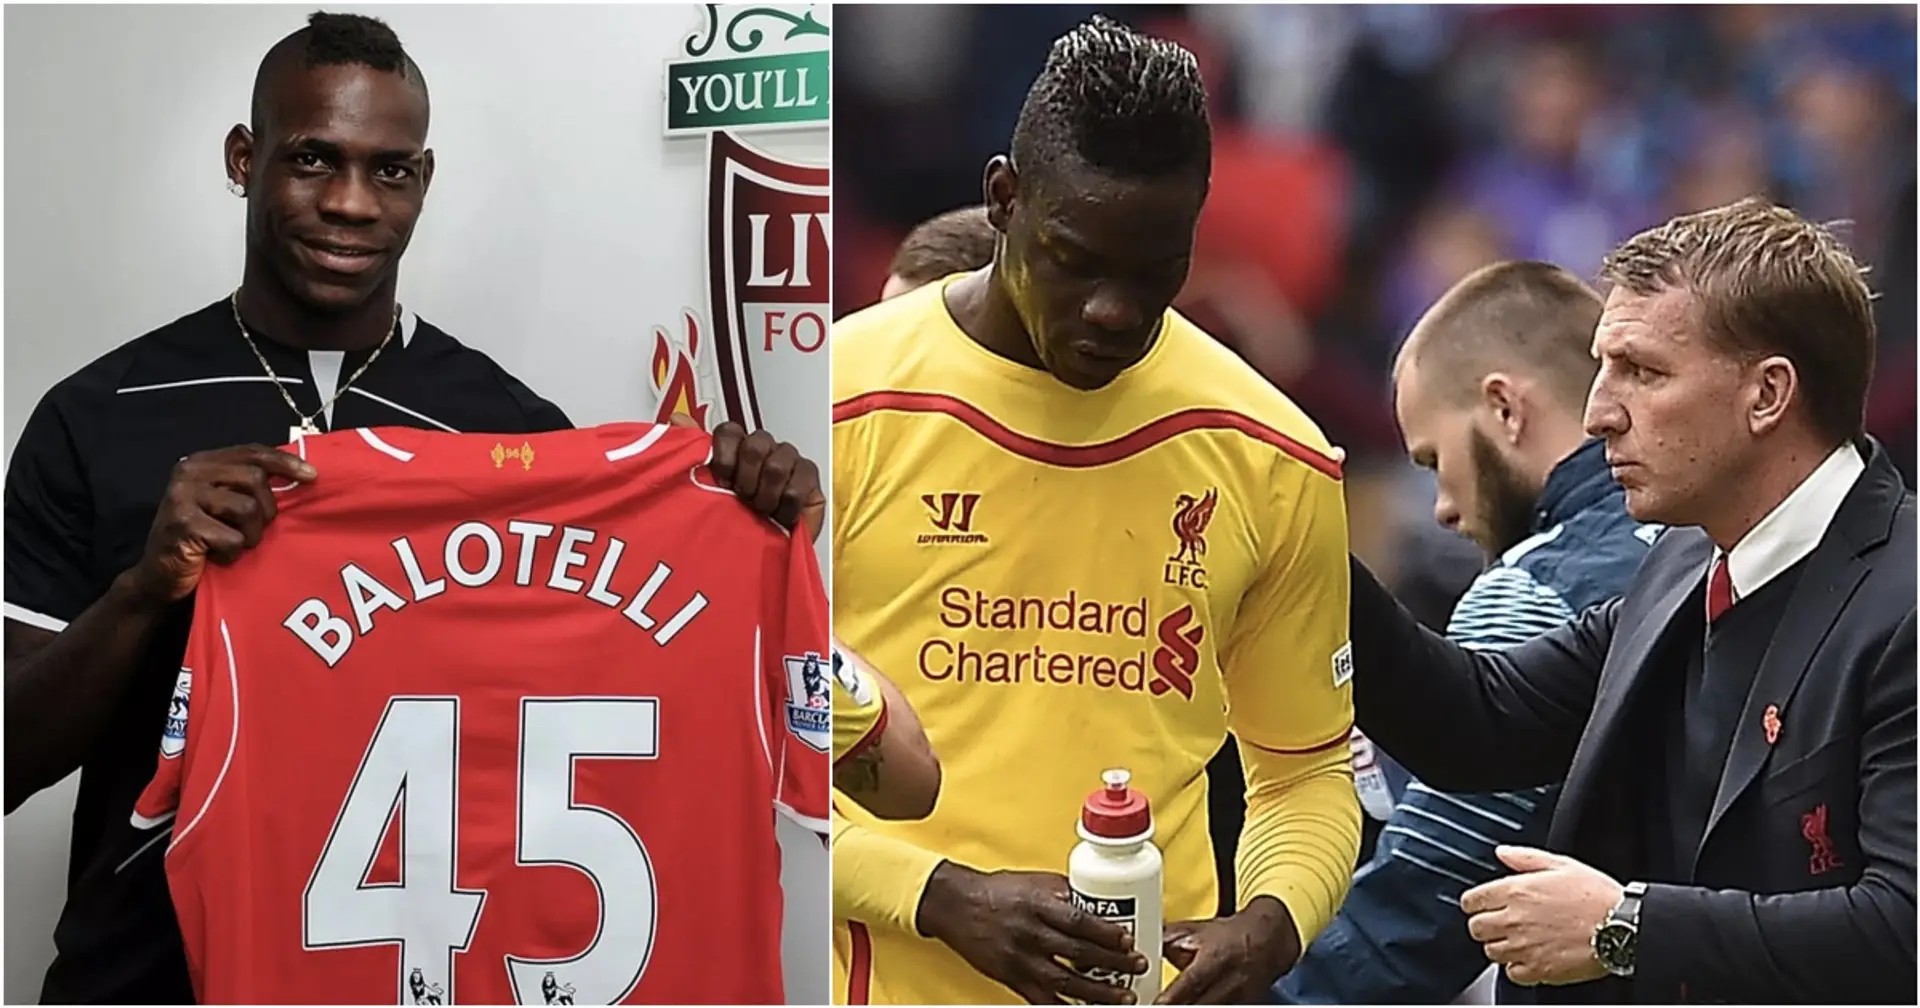 Bizarre £1m clause in Balotelli's Liverpool contract revealed - it's so him!